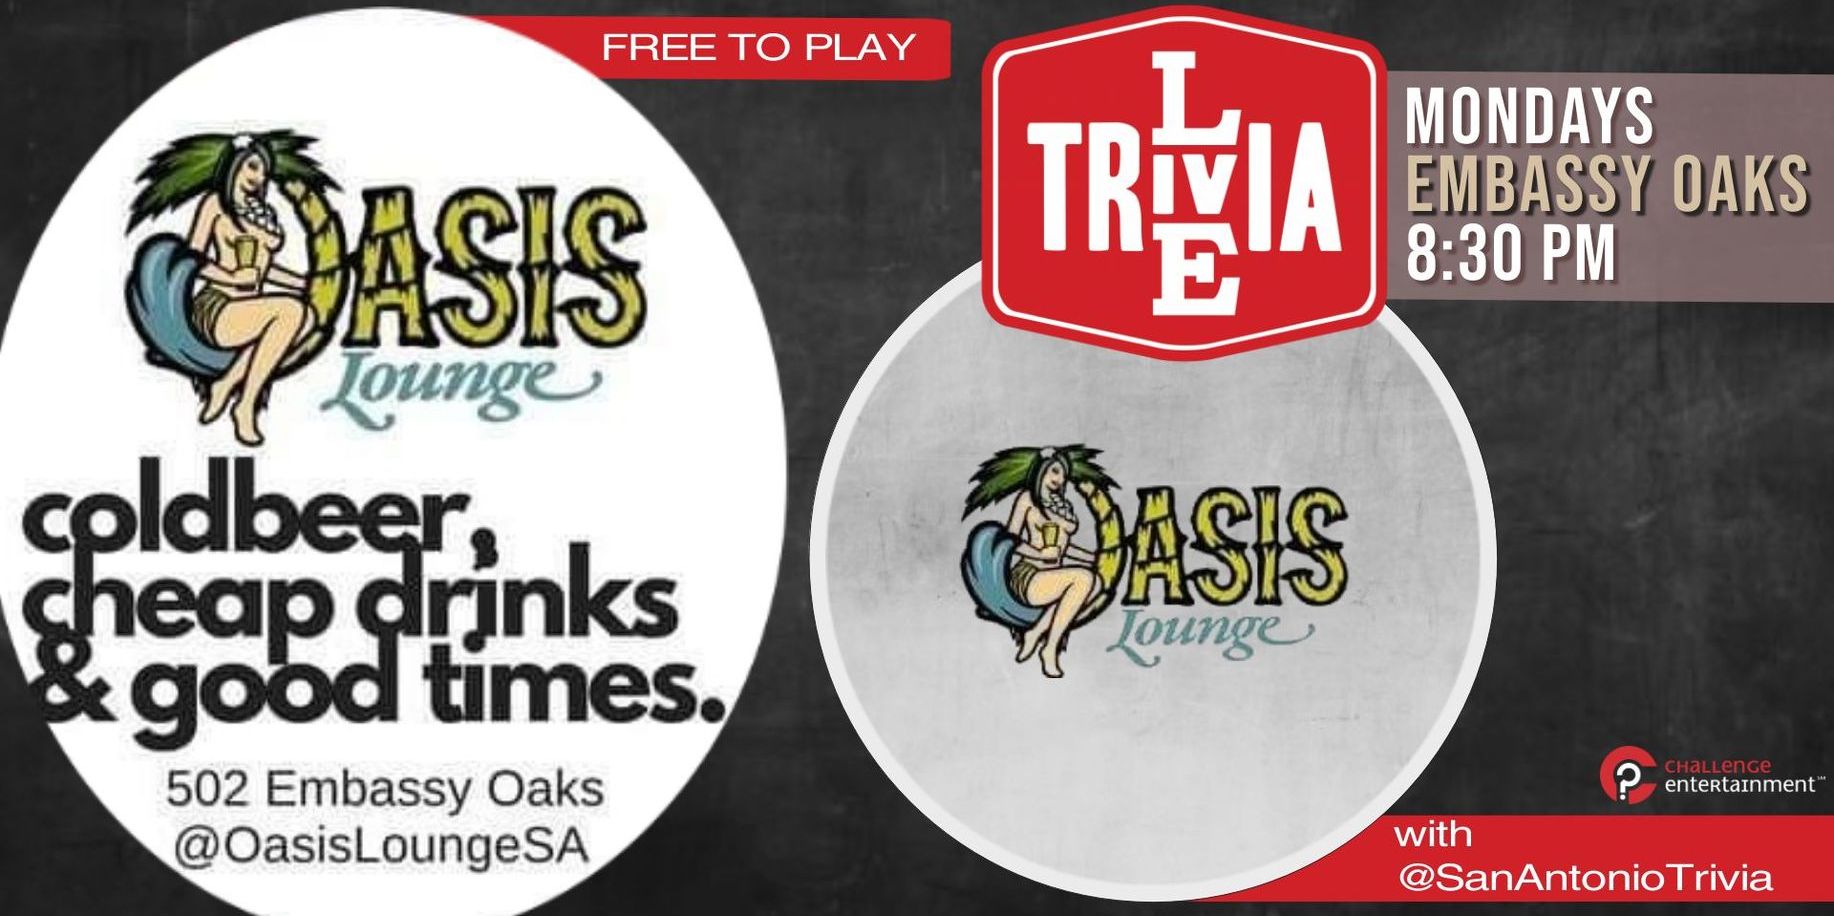 Live Trivia at Oasis Lounge